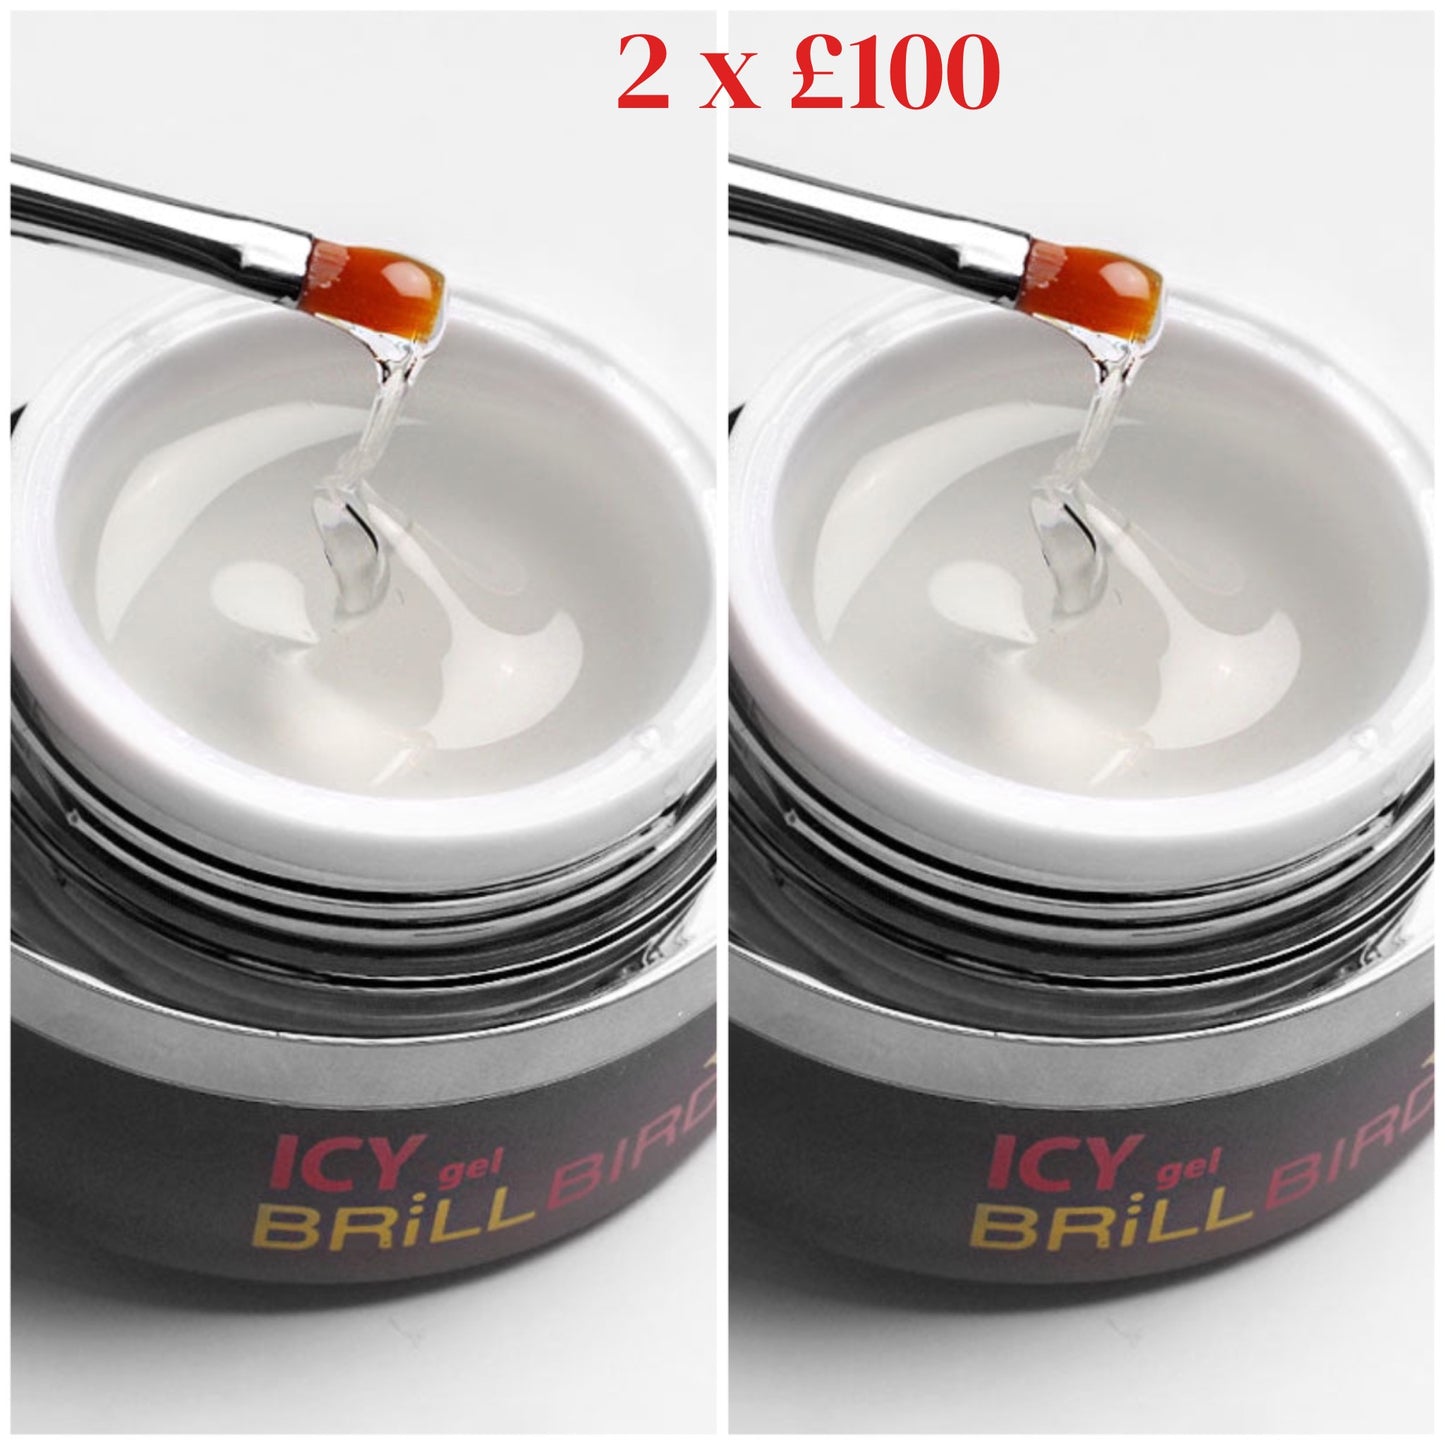 Icy gel 50ml duo (2 for £100)